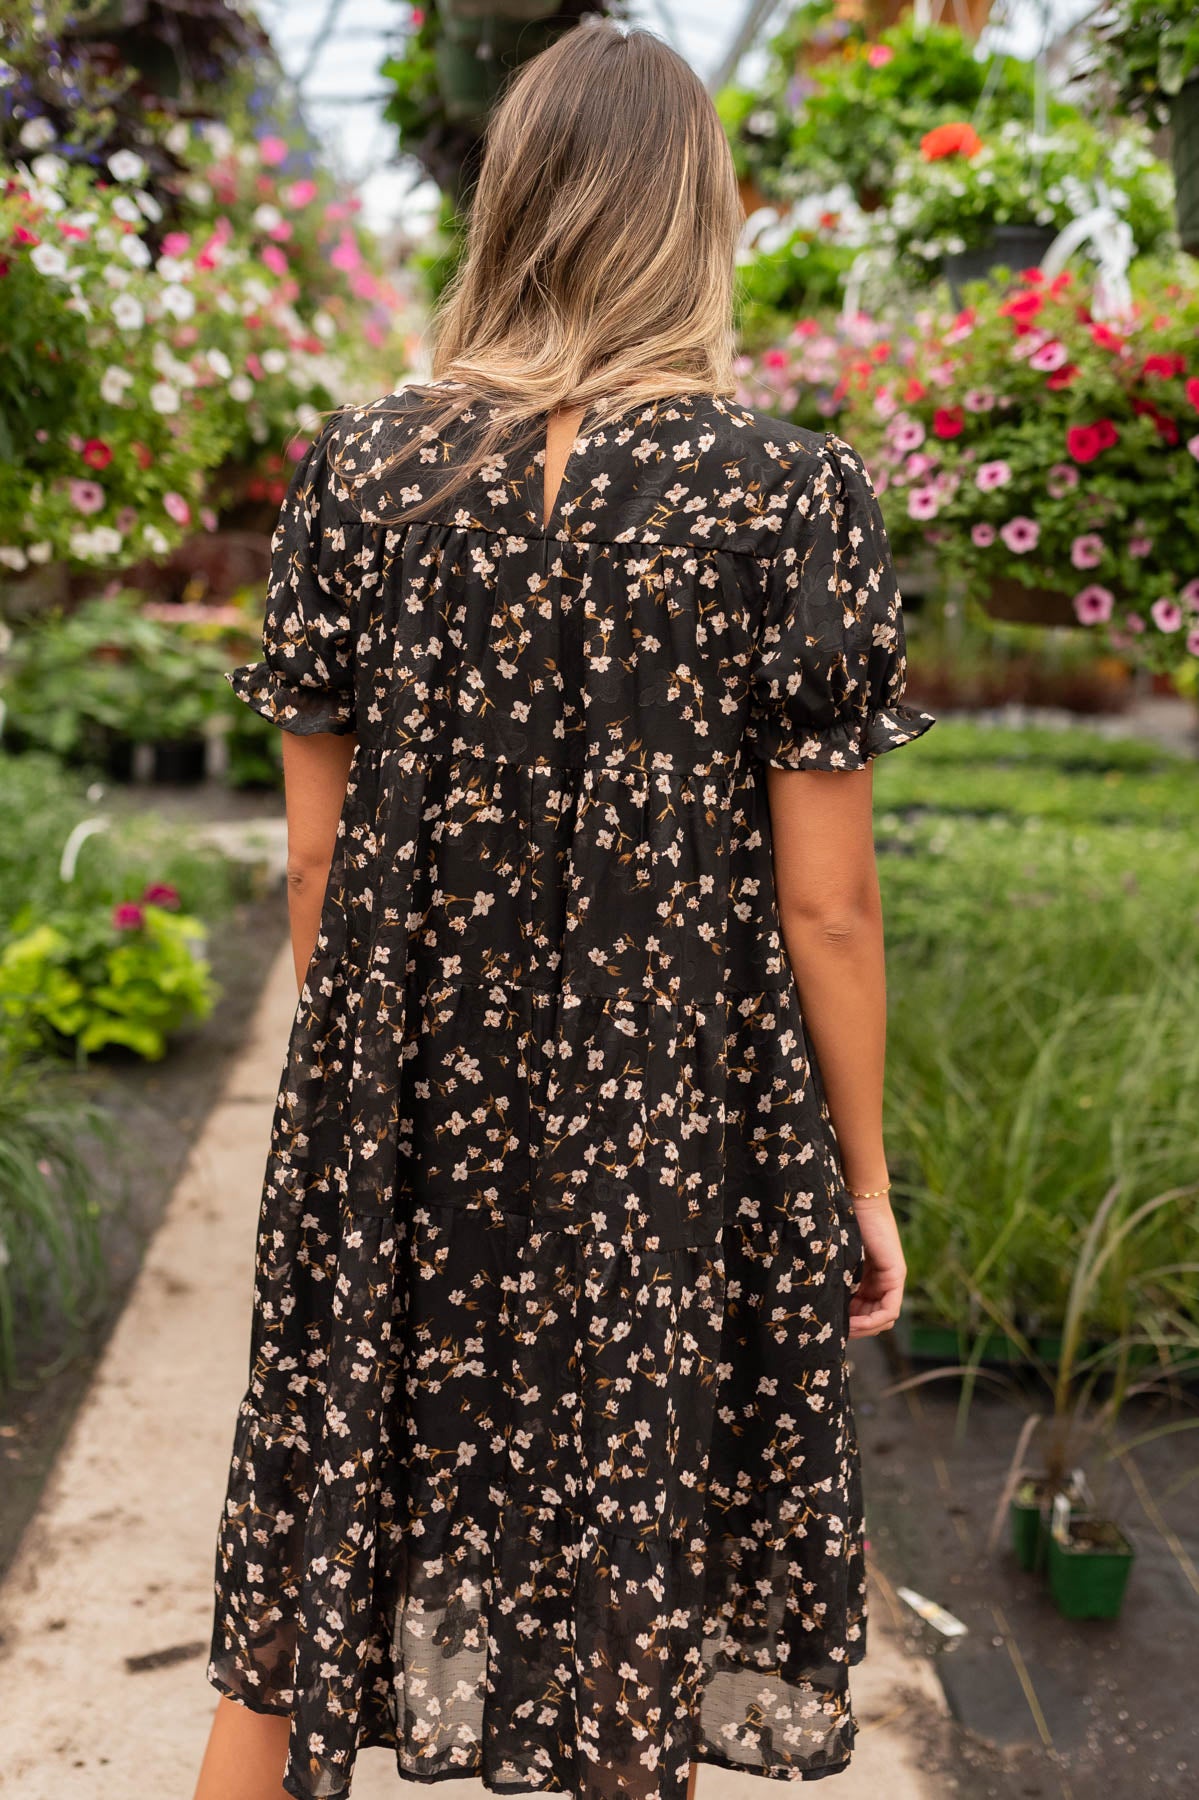 Back view of the black floral midi dress